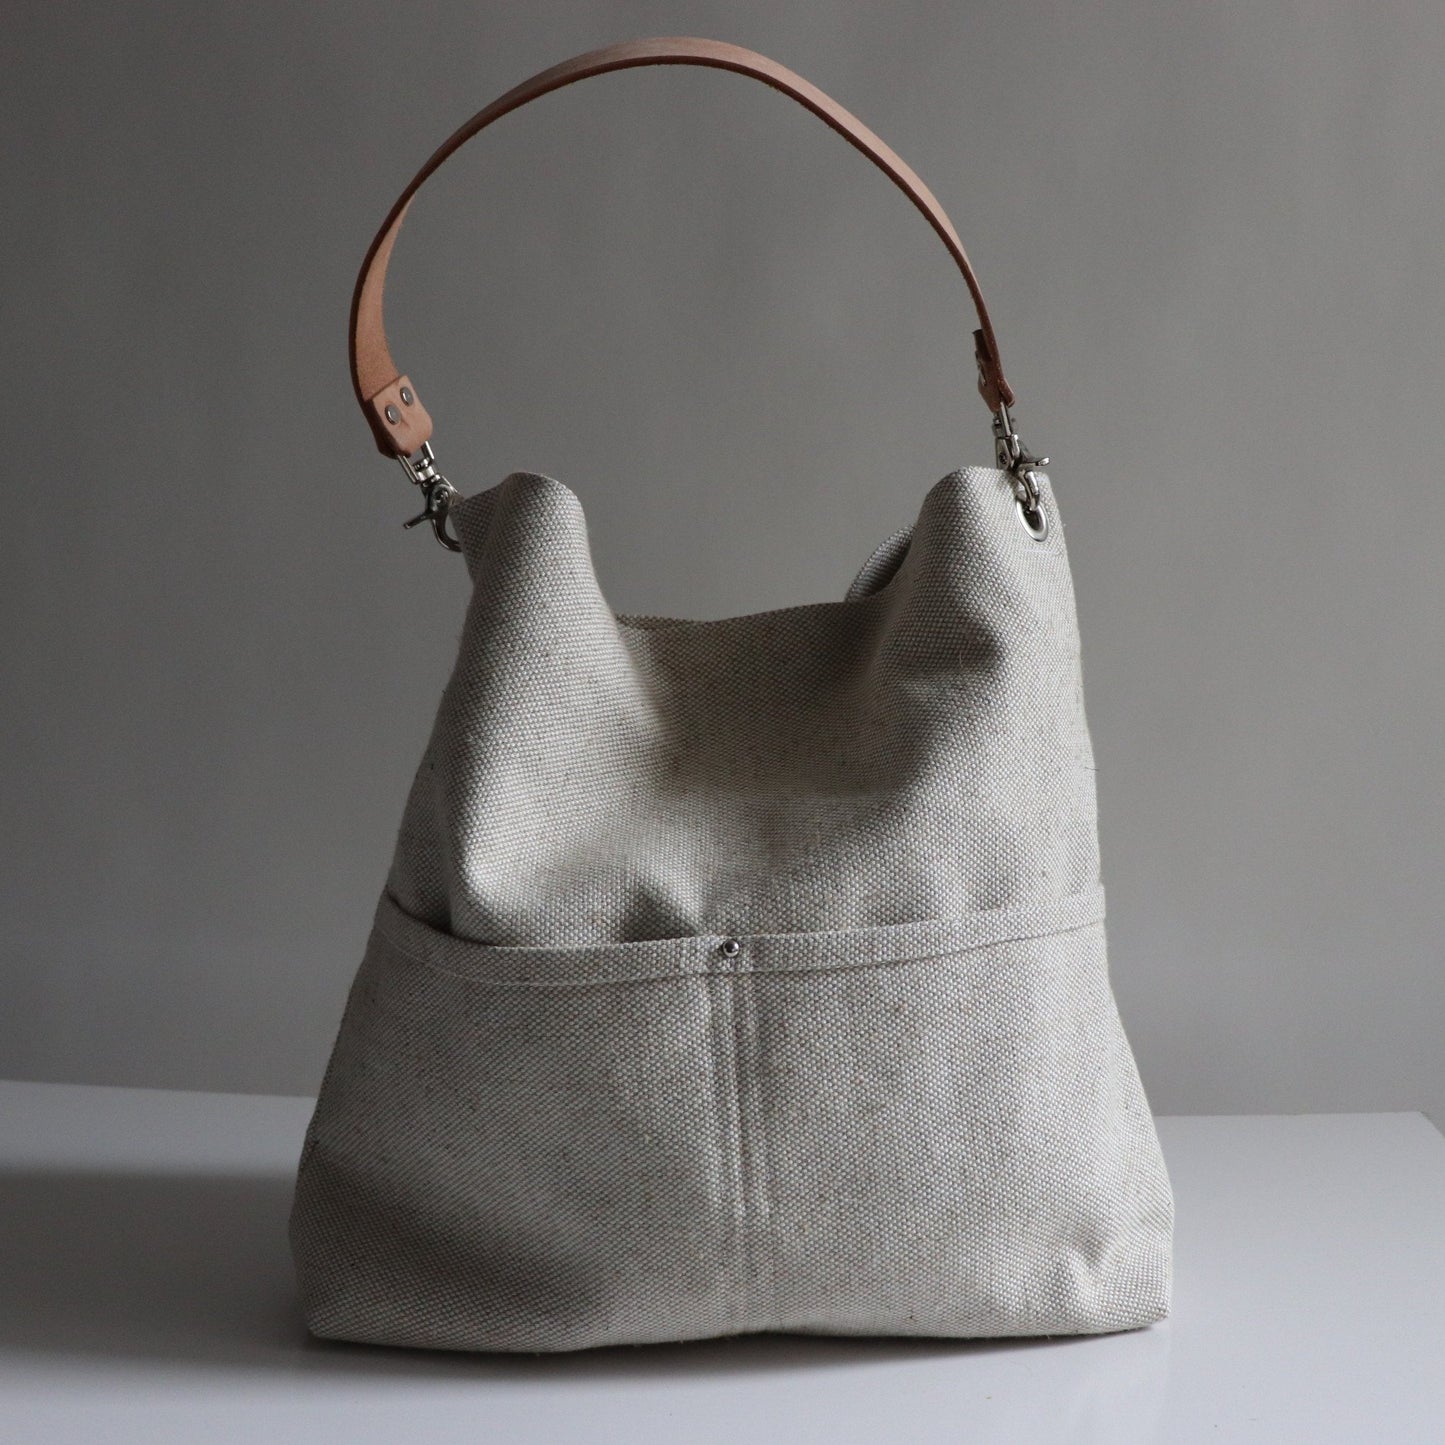 slouchy shoulder bag in natural woven flax 